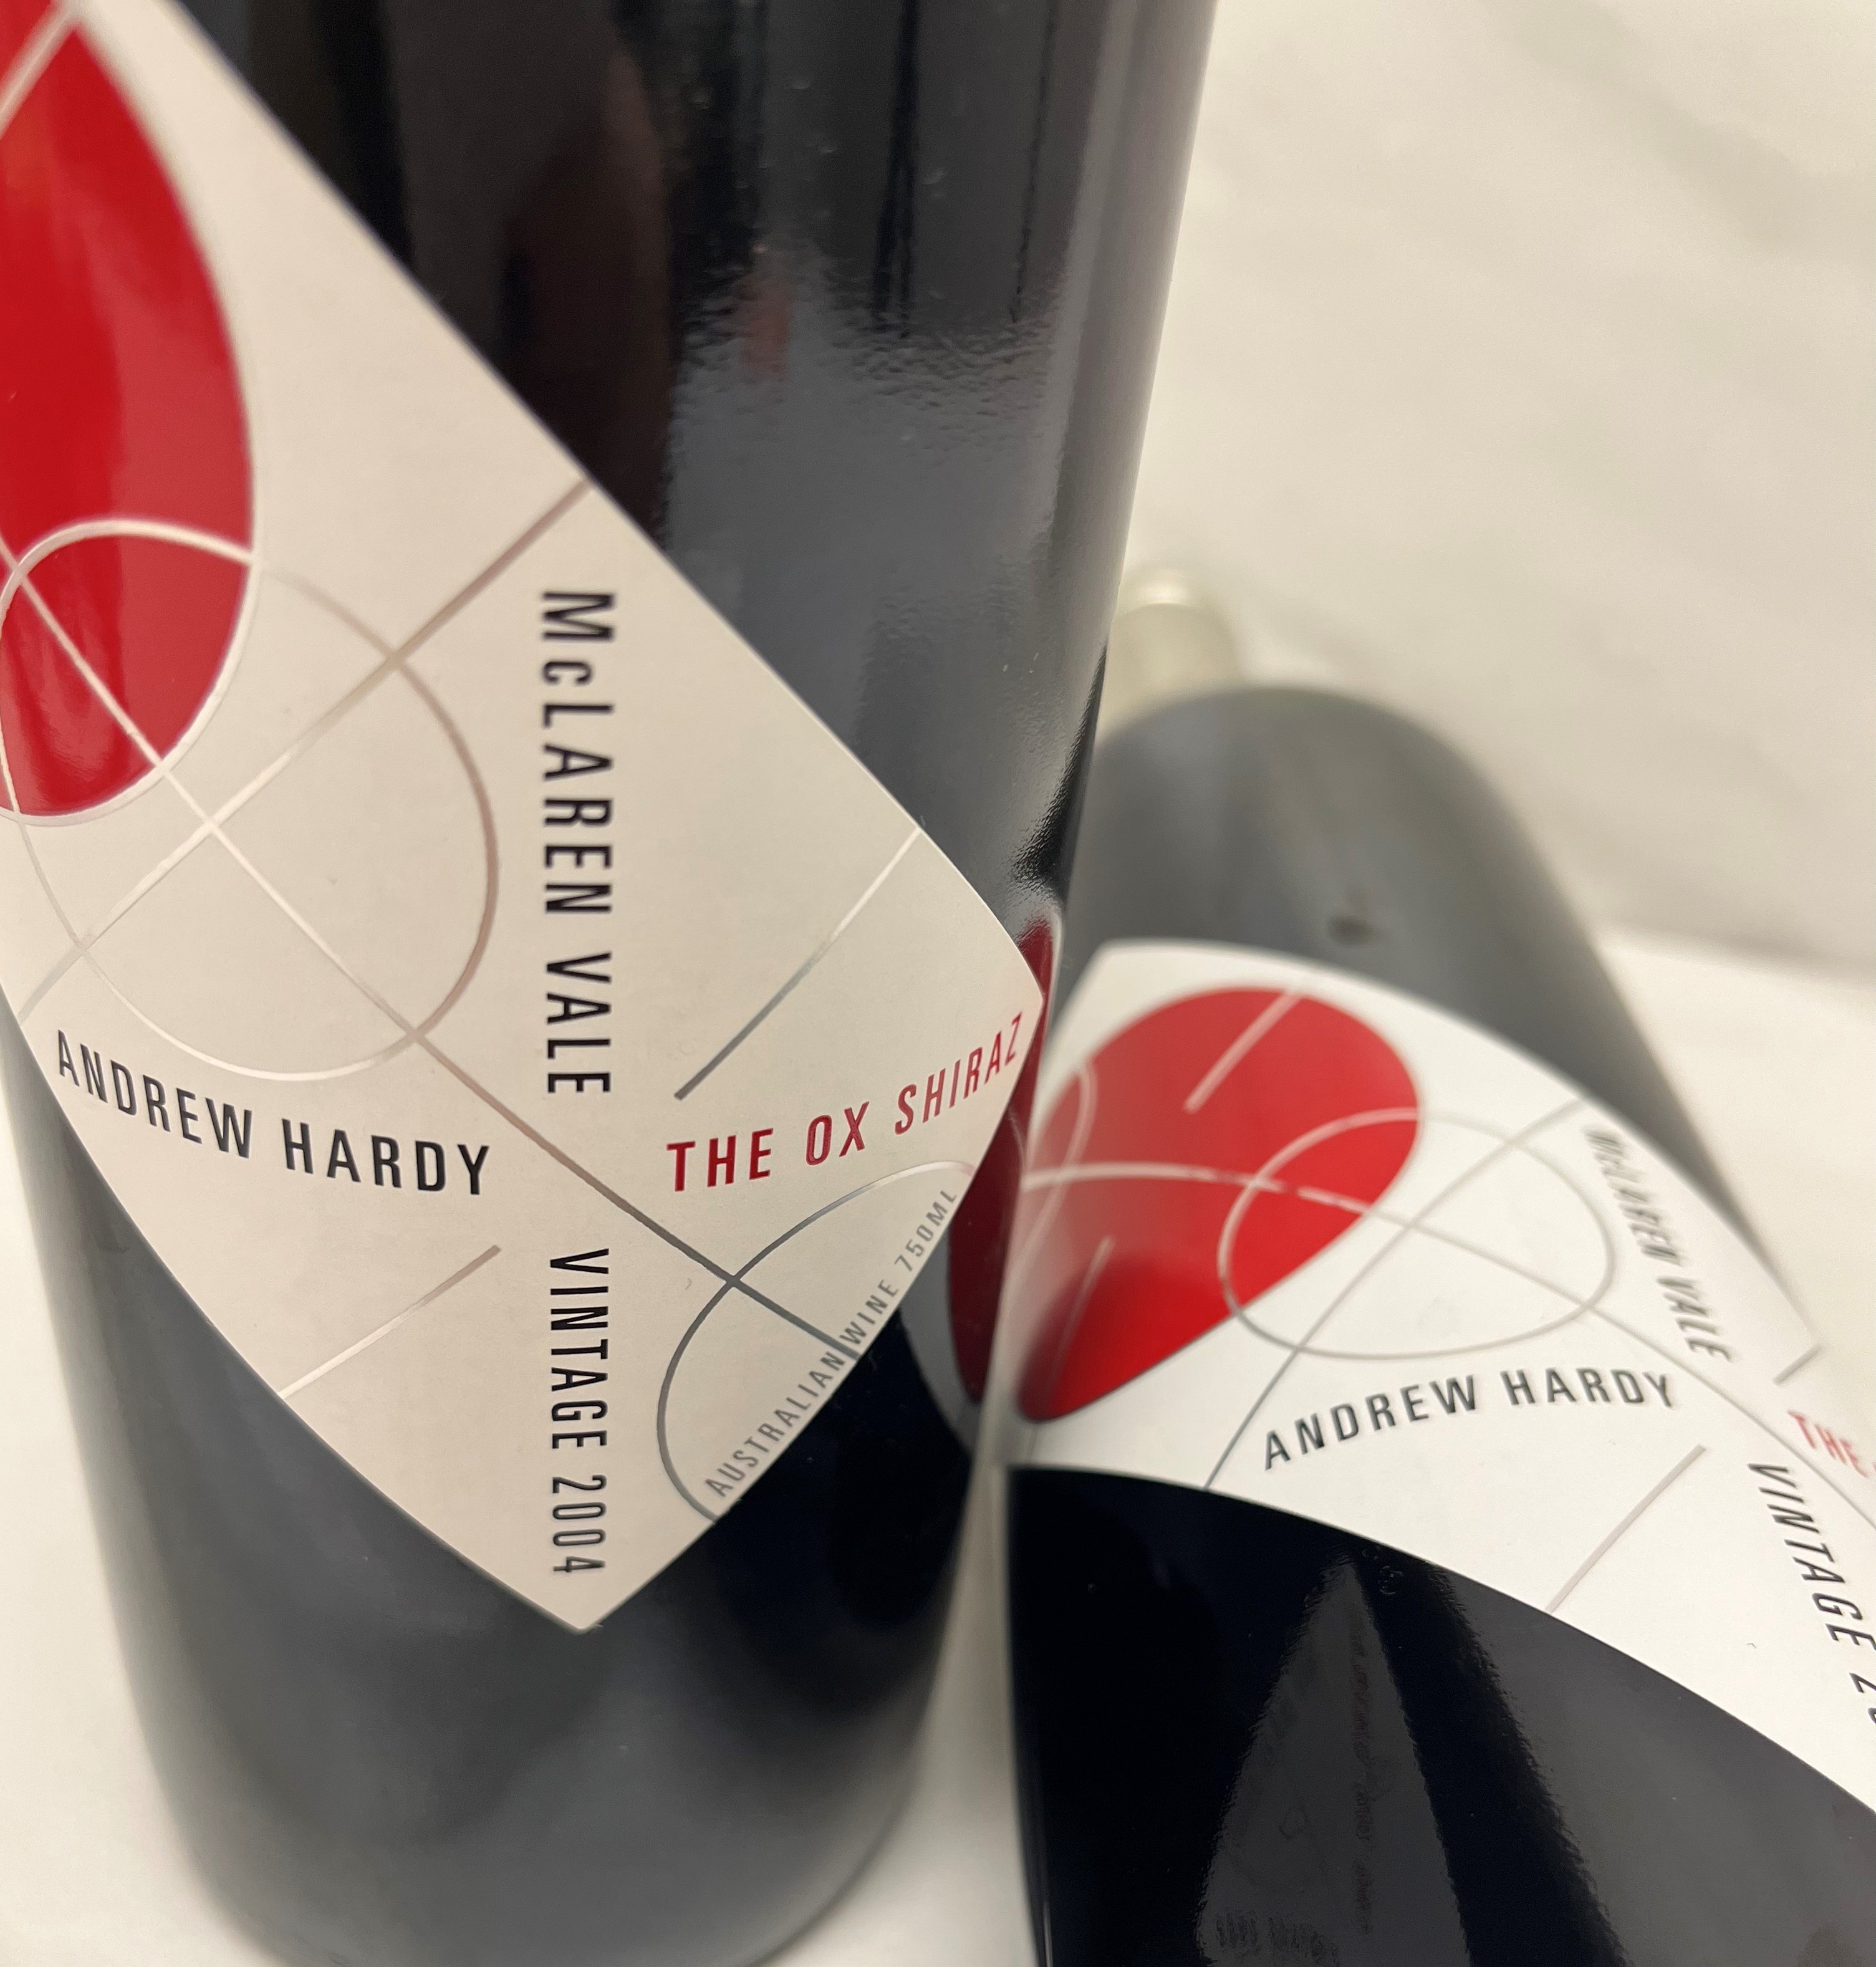 View All Wines from Andrew Hardy